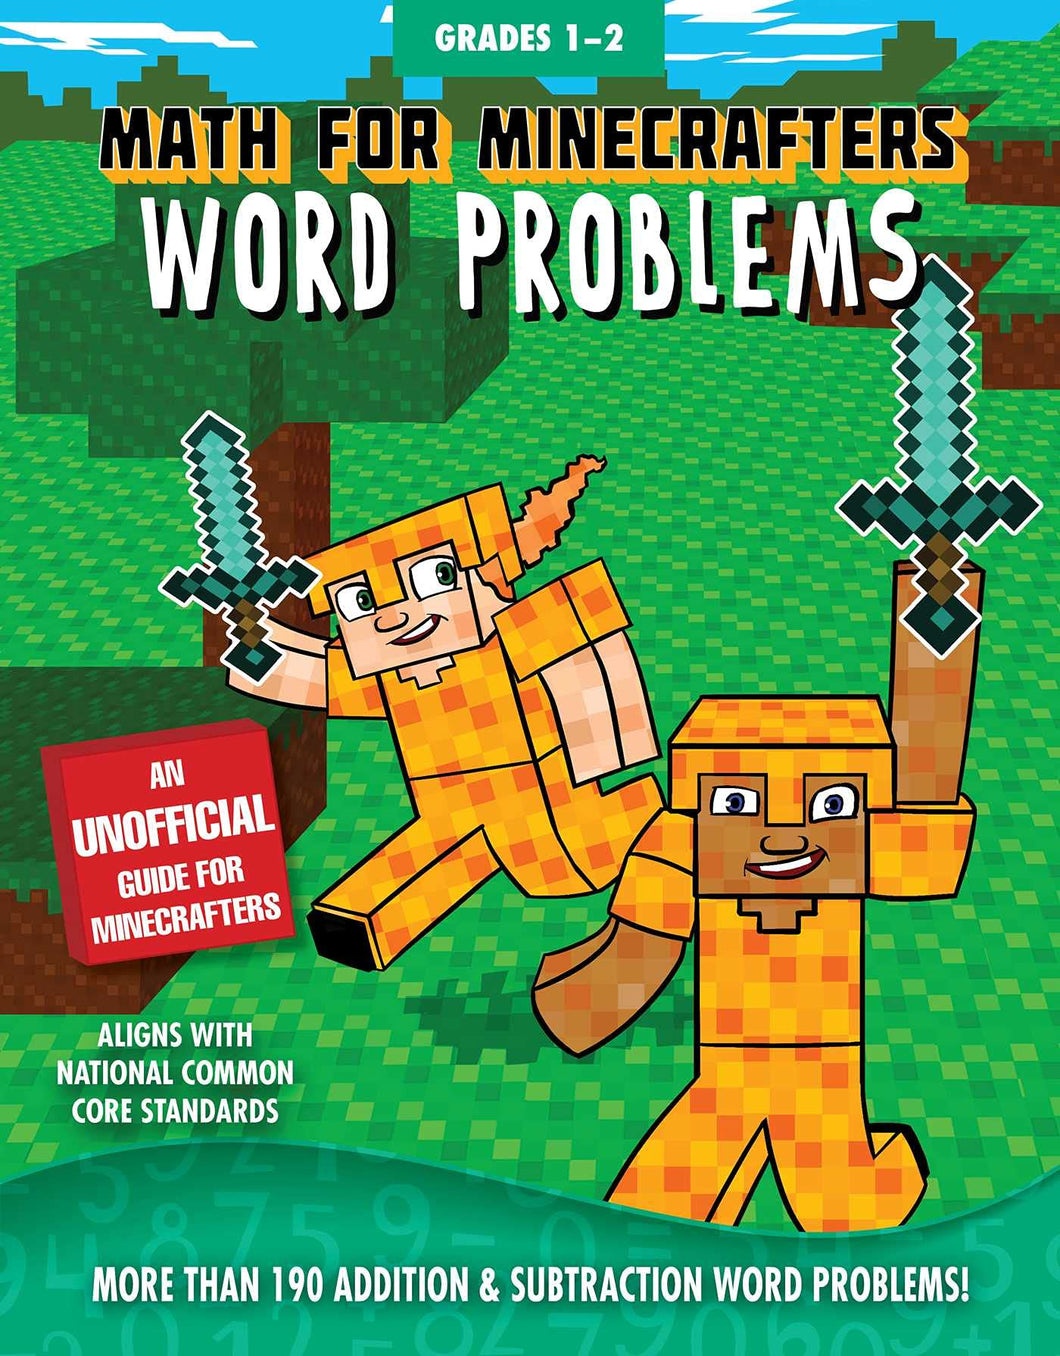 Math For Minecrafters Word Problems Grade 1-2